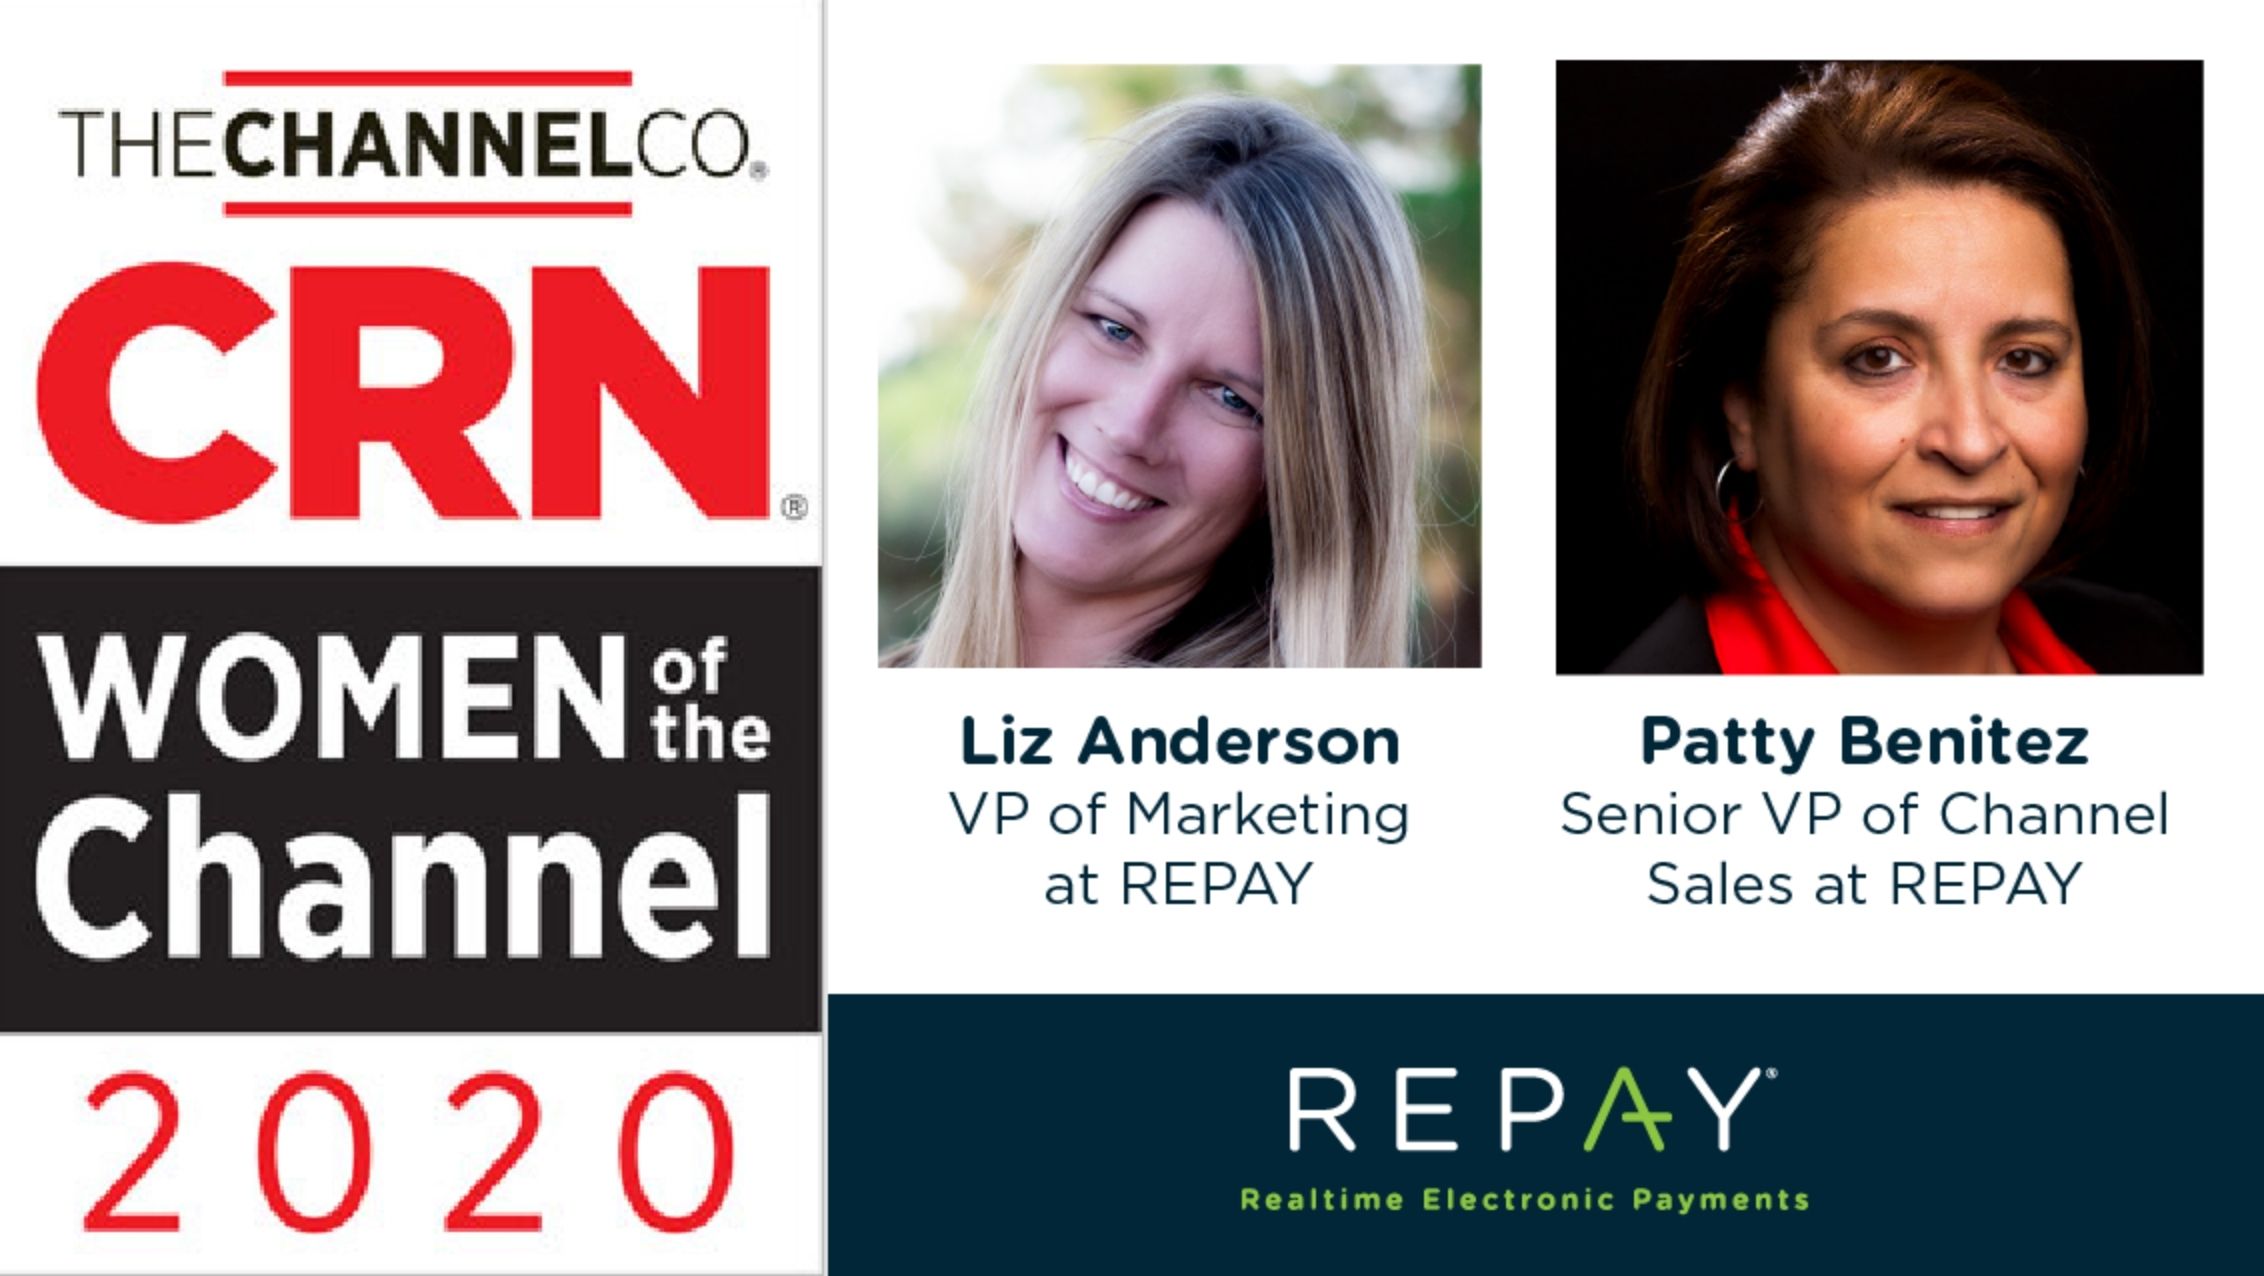 REPAY Channel Leaders Honored Again on 2020 CRN Women of the Channel List